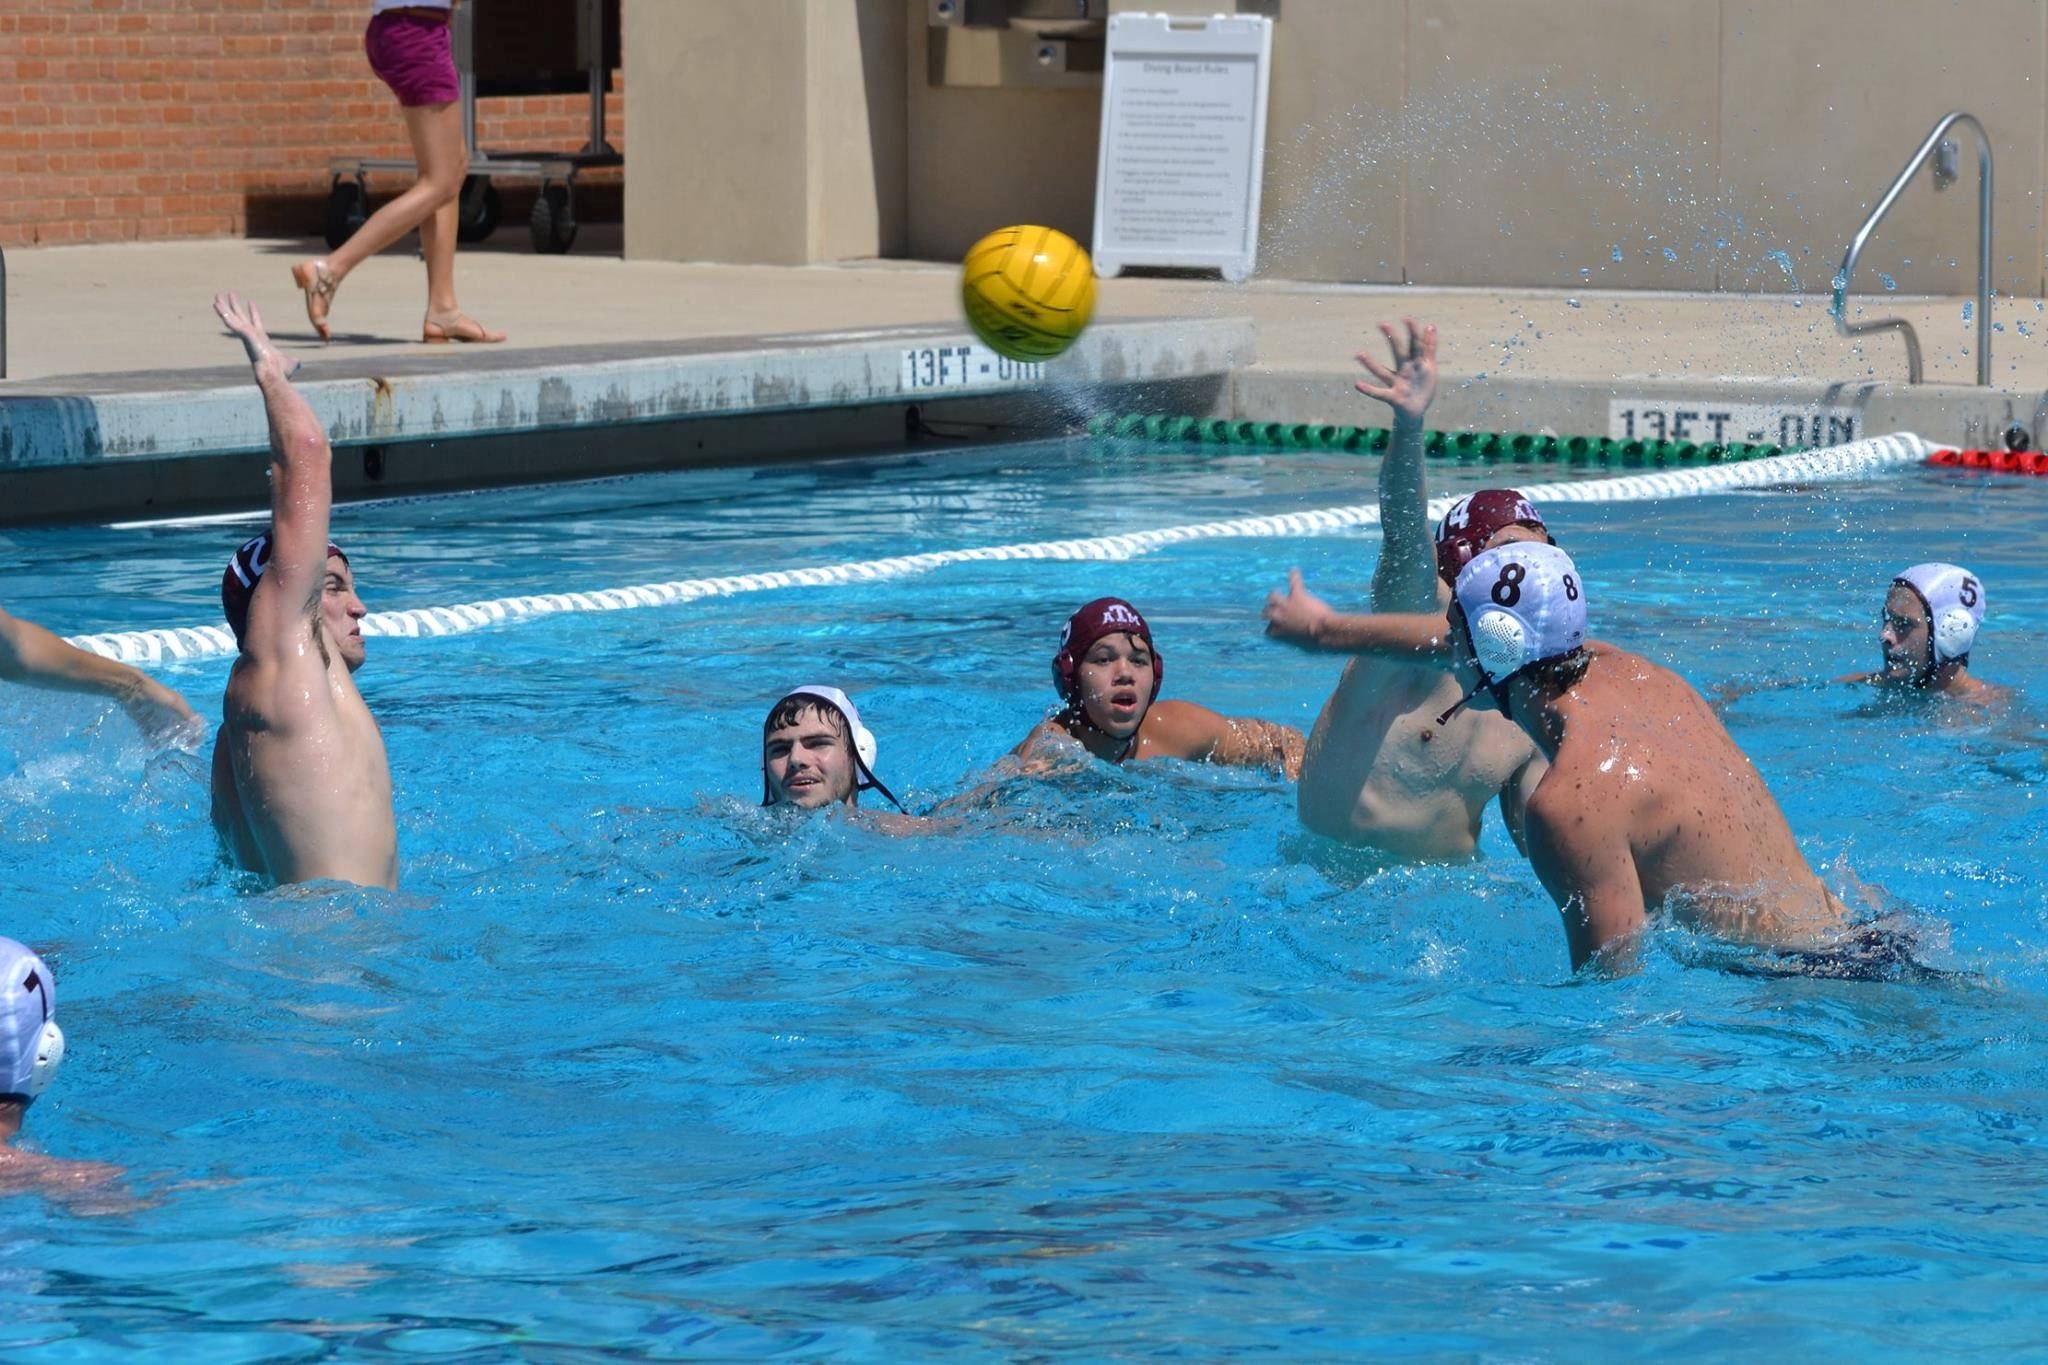 Men's Water Polo attempting a shot on goal